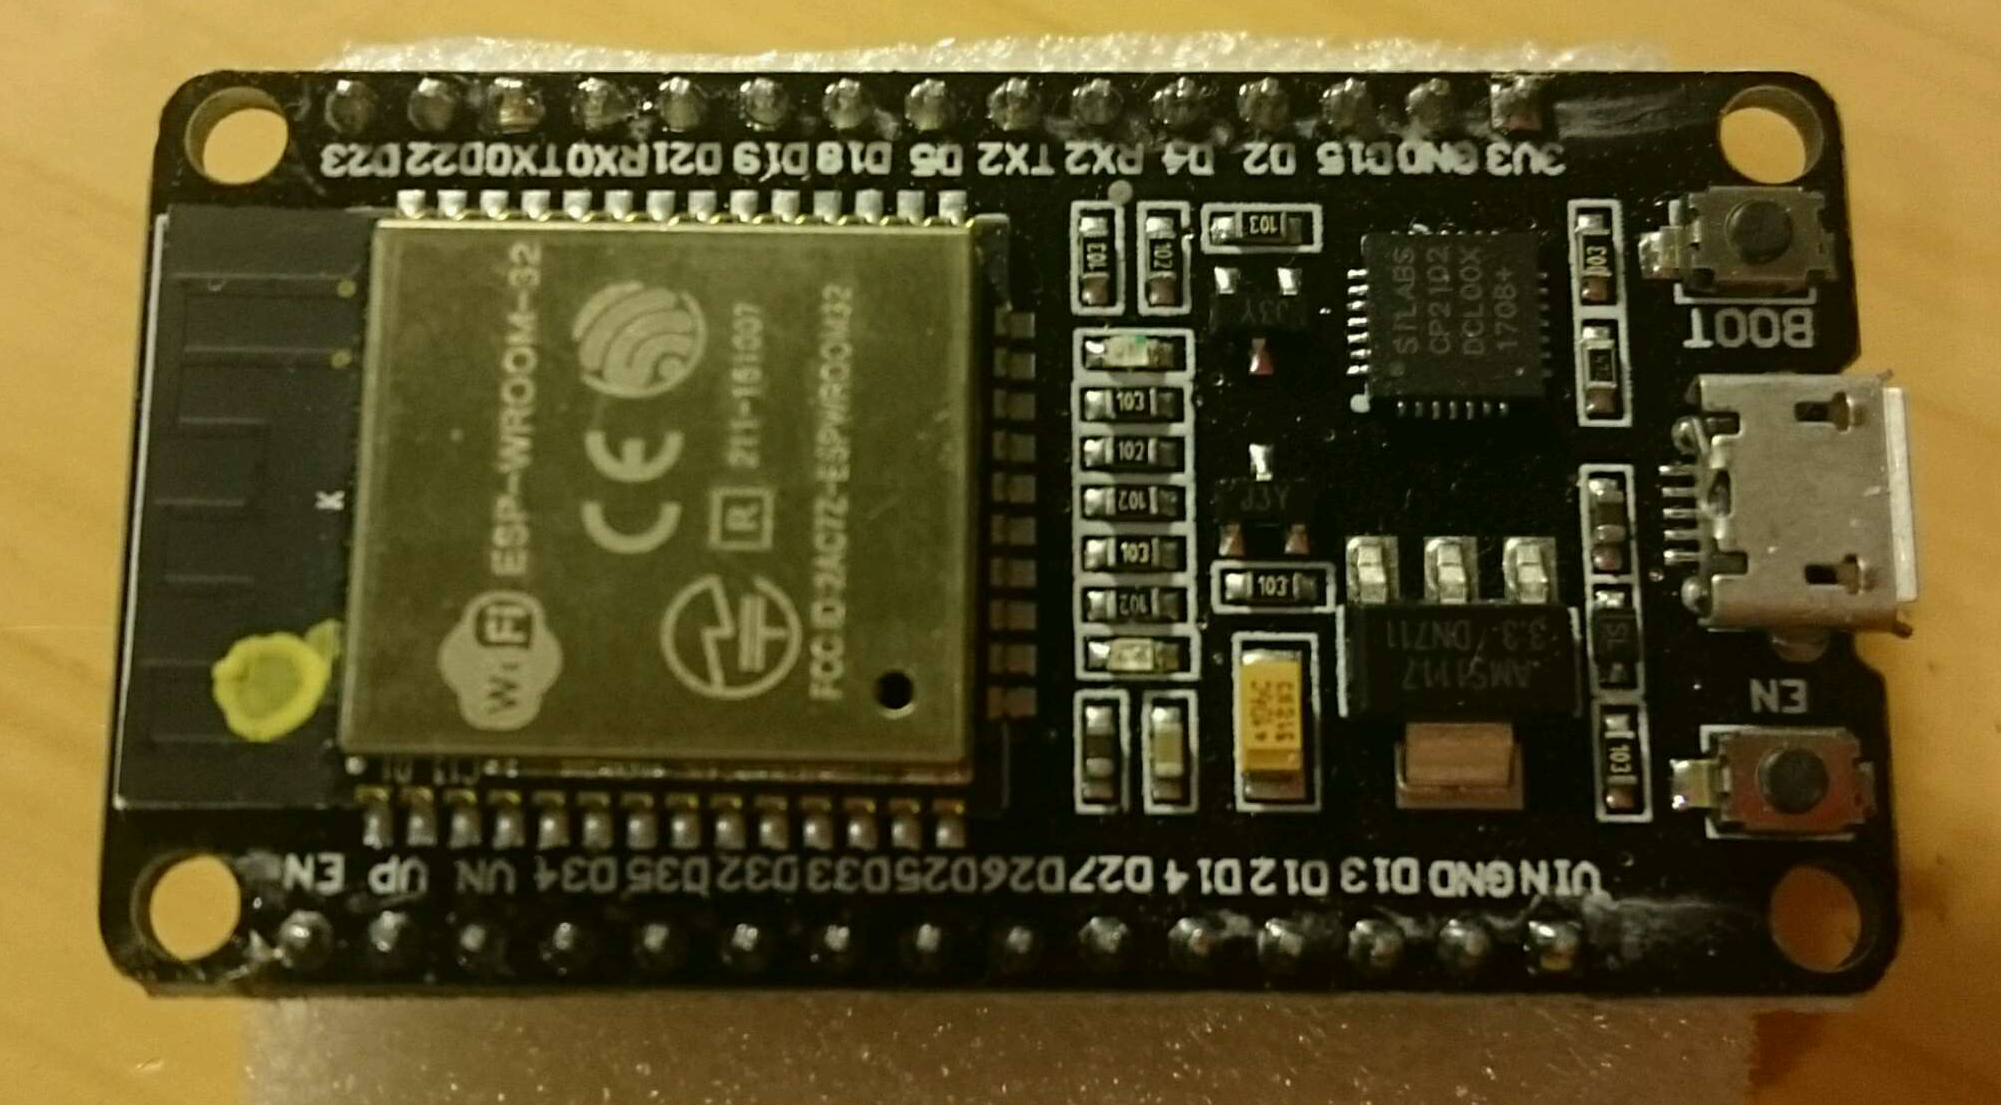 As a microcontroller, I used DOIT ESP32 DevKitV1(1) that I had at hand ...